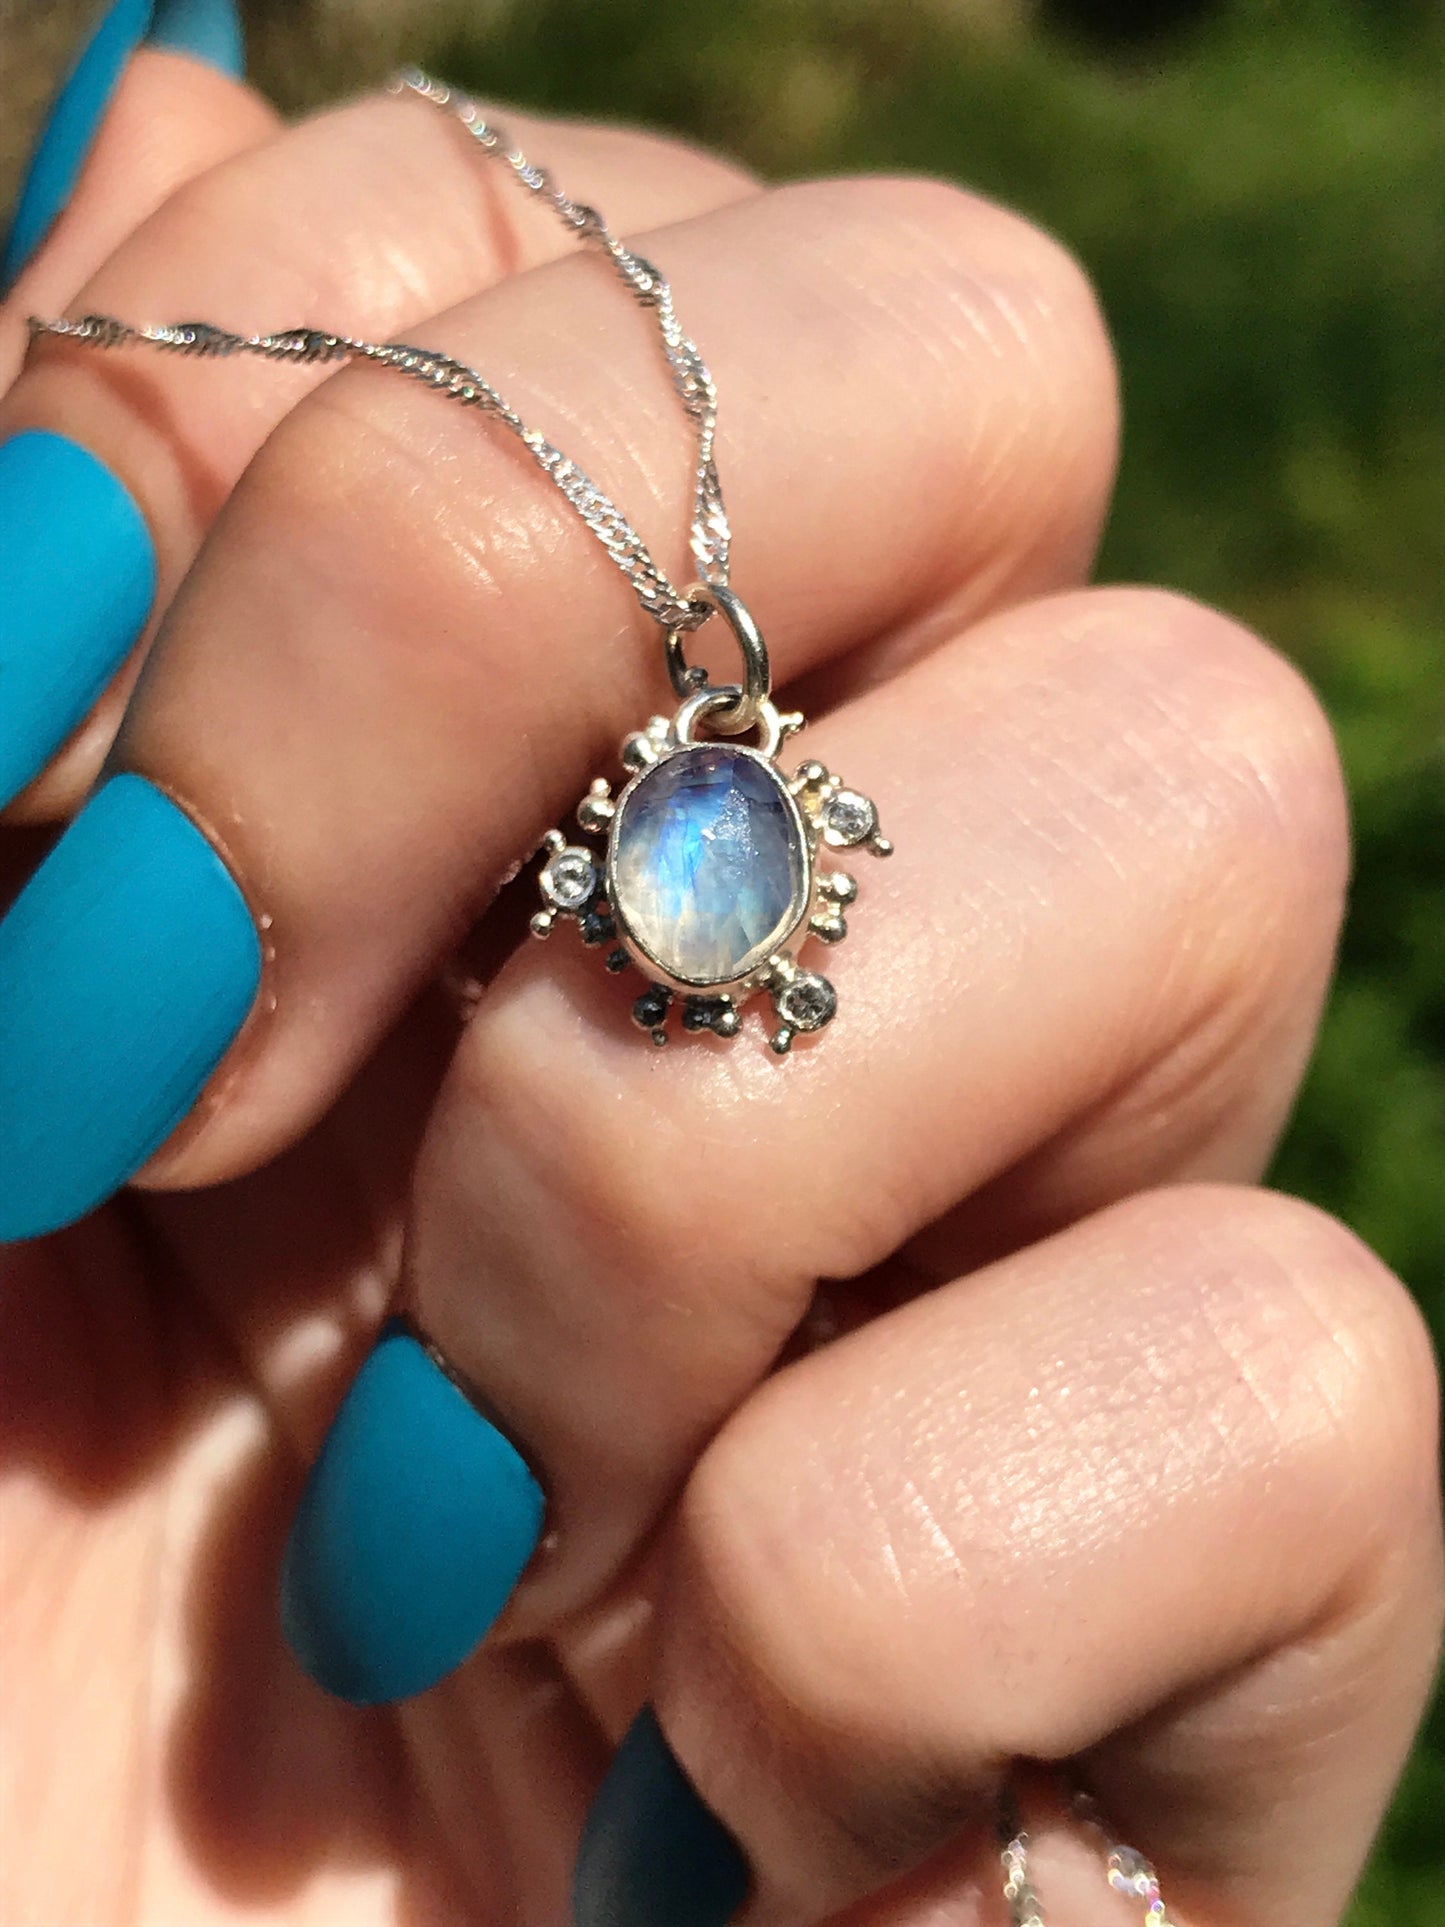 Rainbow Moonstone, White Topaz and Sterling Silver Granulation Pendant Necklace on Twisted Sterling Silver Chain